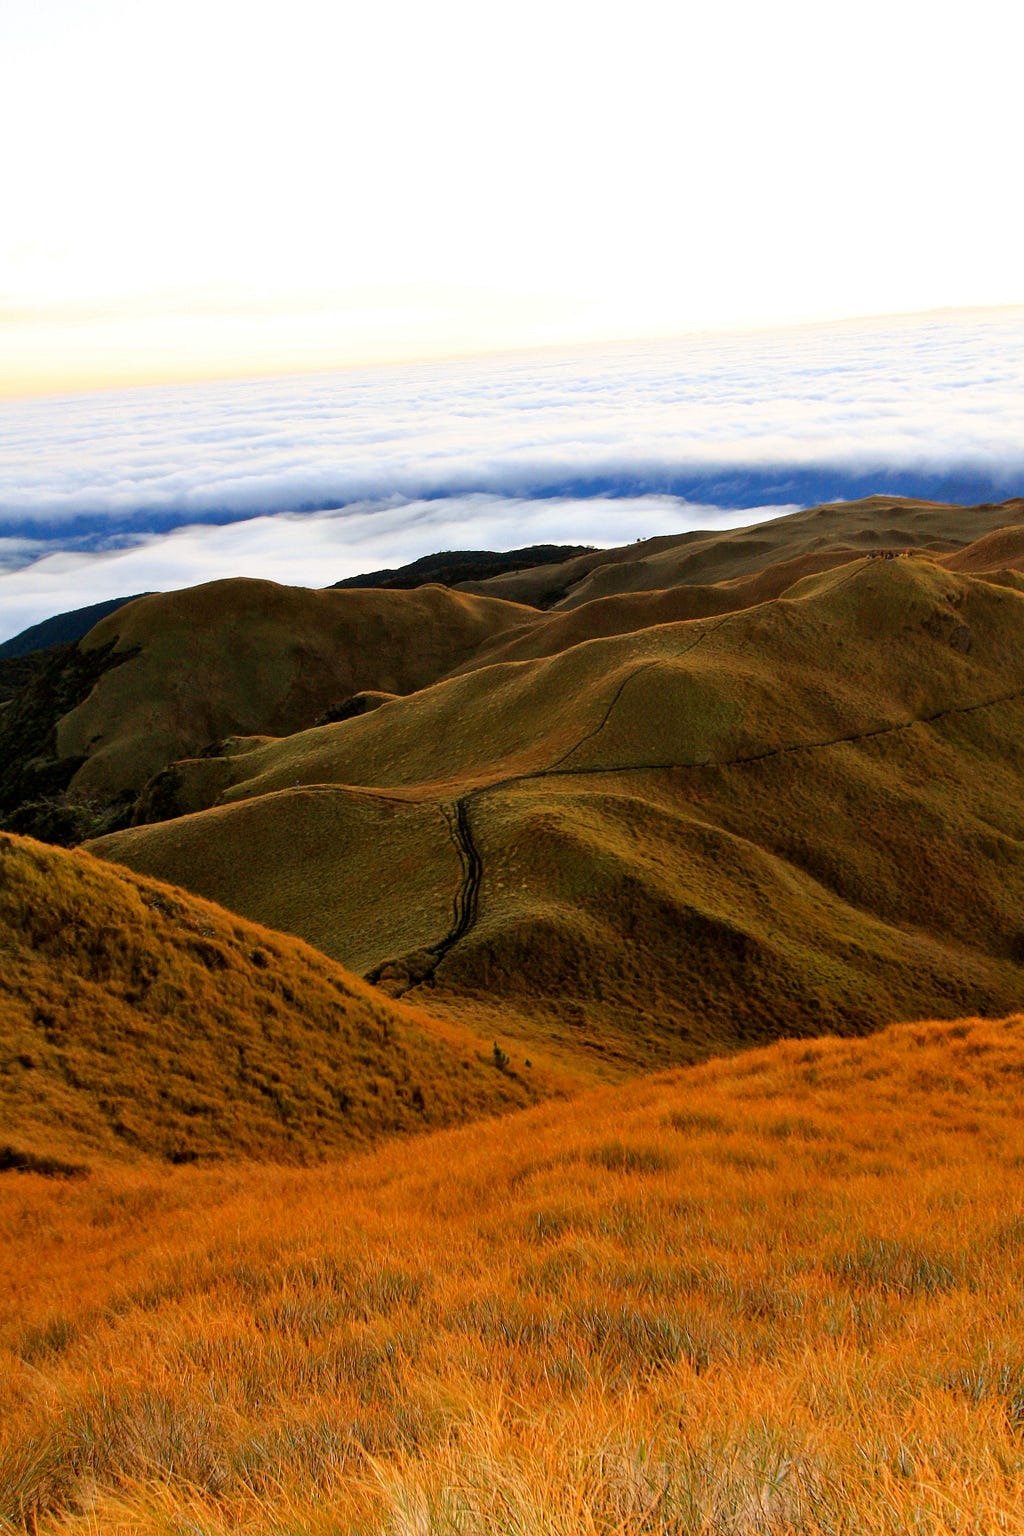 Mt. Pulag, the second-highest mountain in Philippines, original image by Melissa Schmidiger